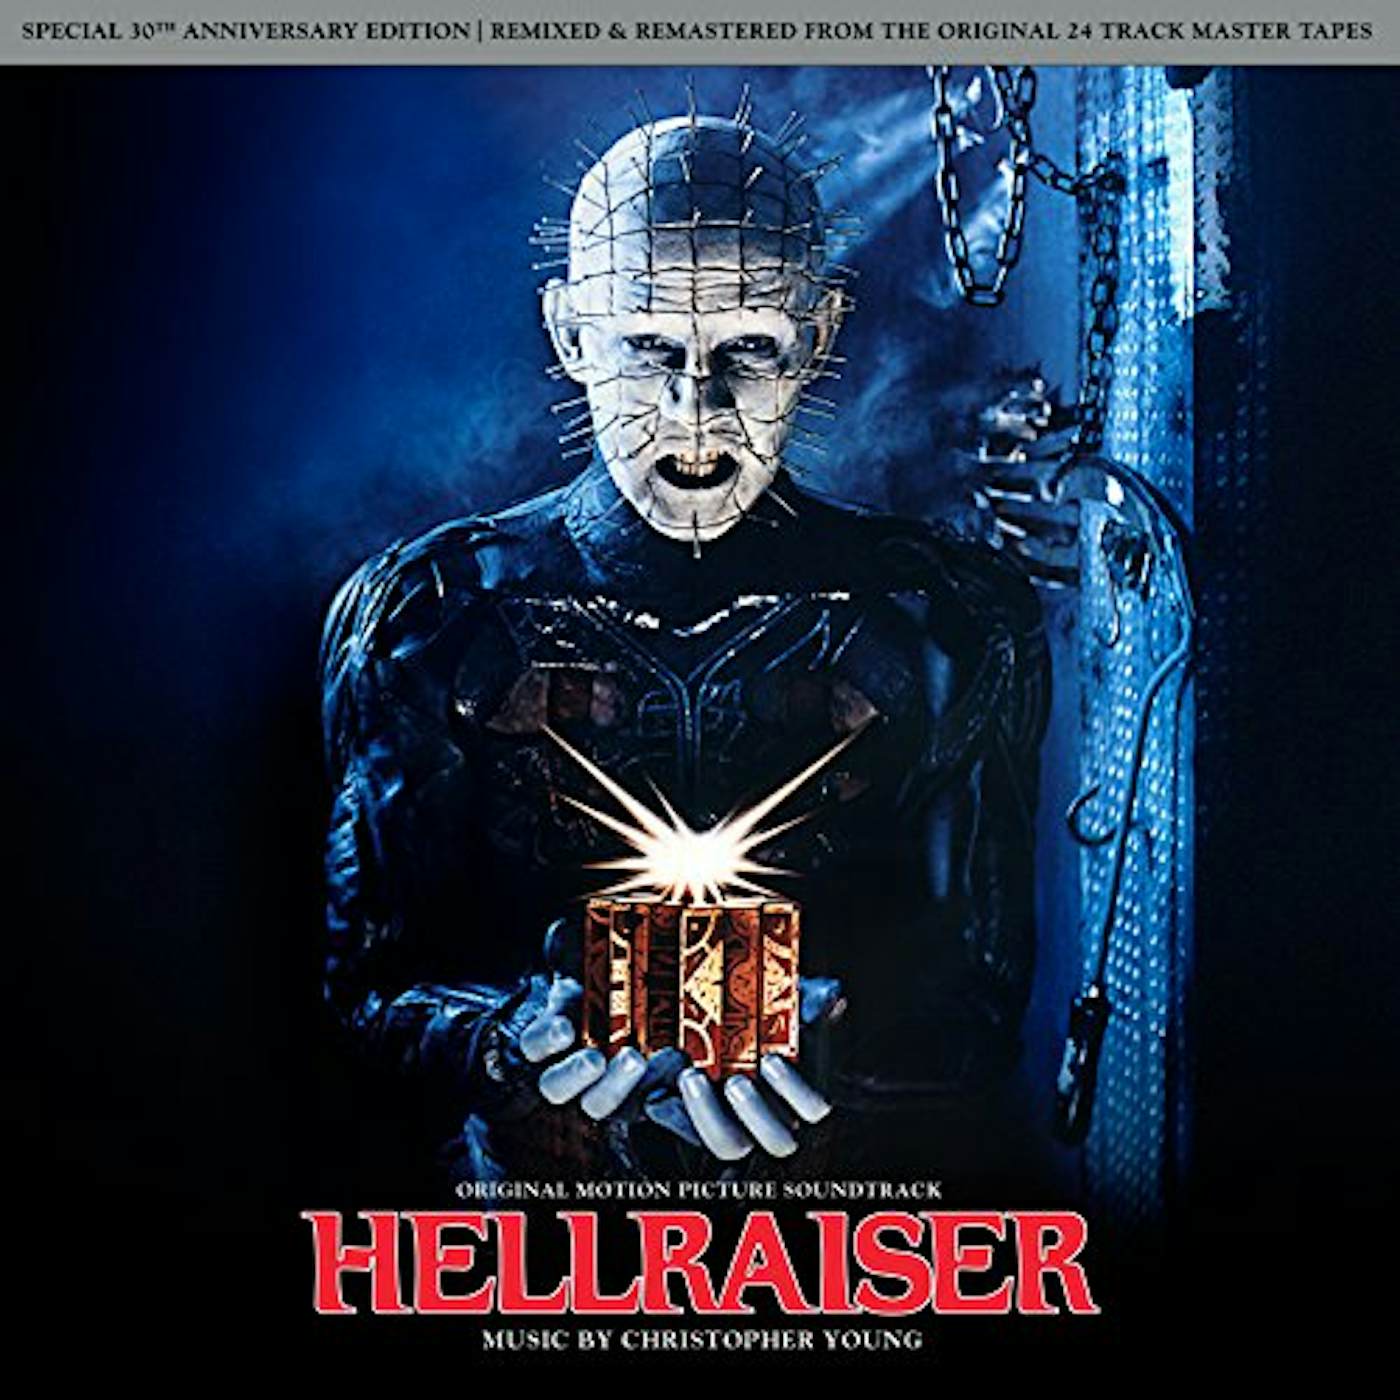 Christopher Young HELLRAISER: 30TH ANNIVERSARY EDITION CD